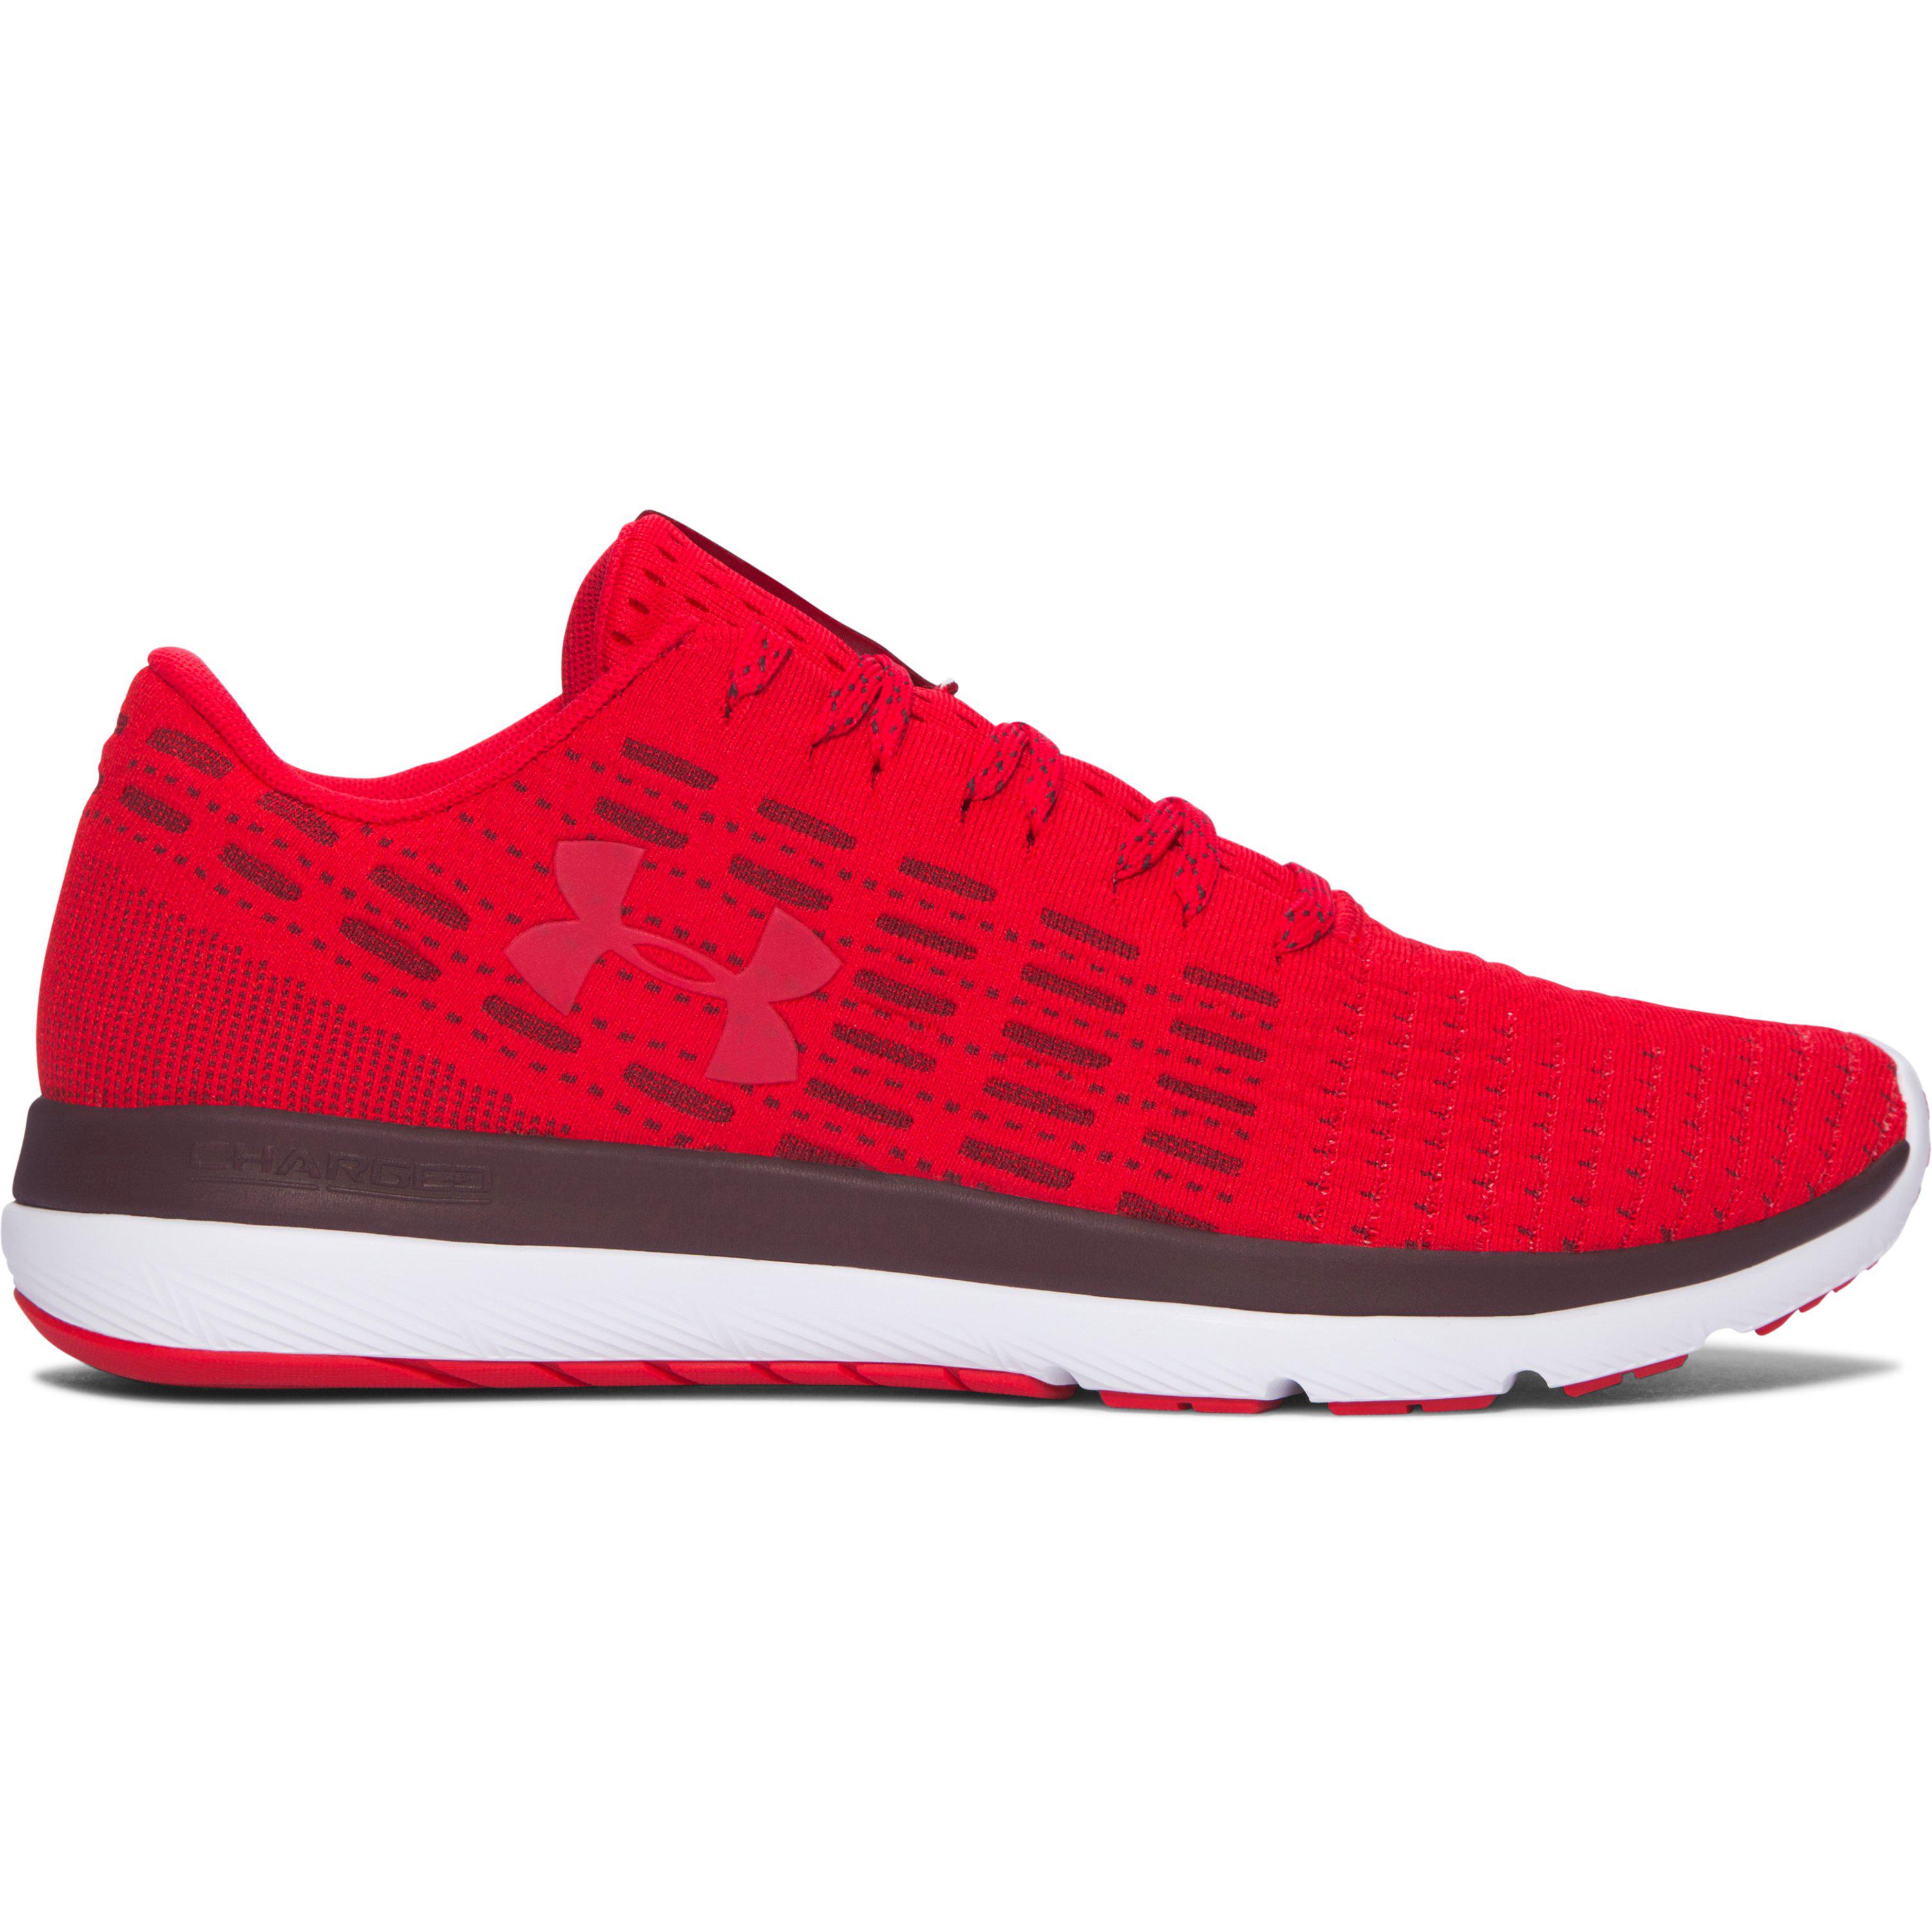 Under Armour Rubber Men's Ua Threadborne Slingflex Shoes in Red/White (Red)  for Men - Lyst